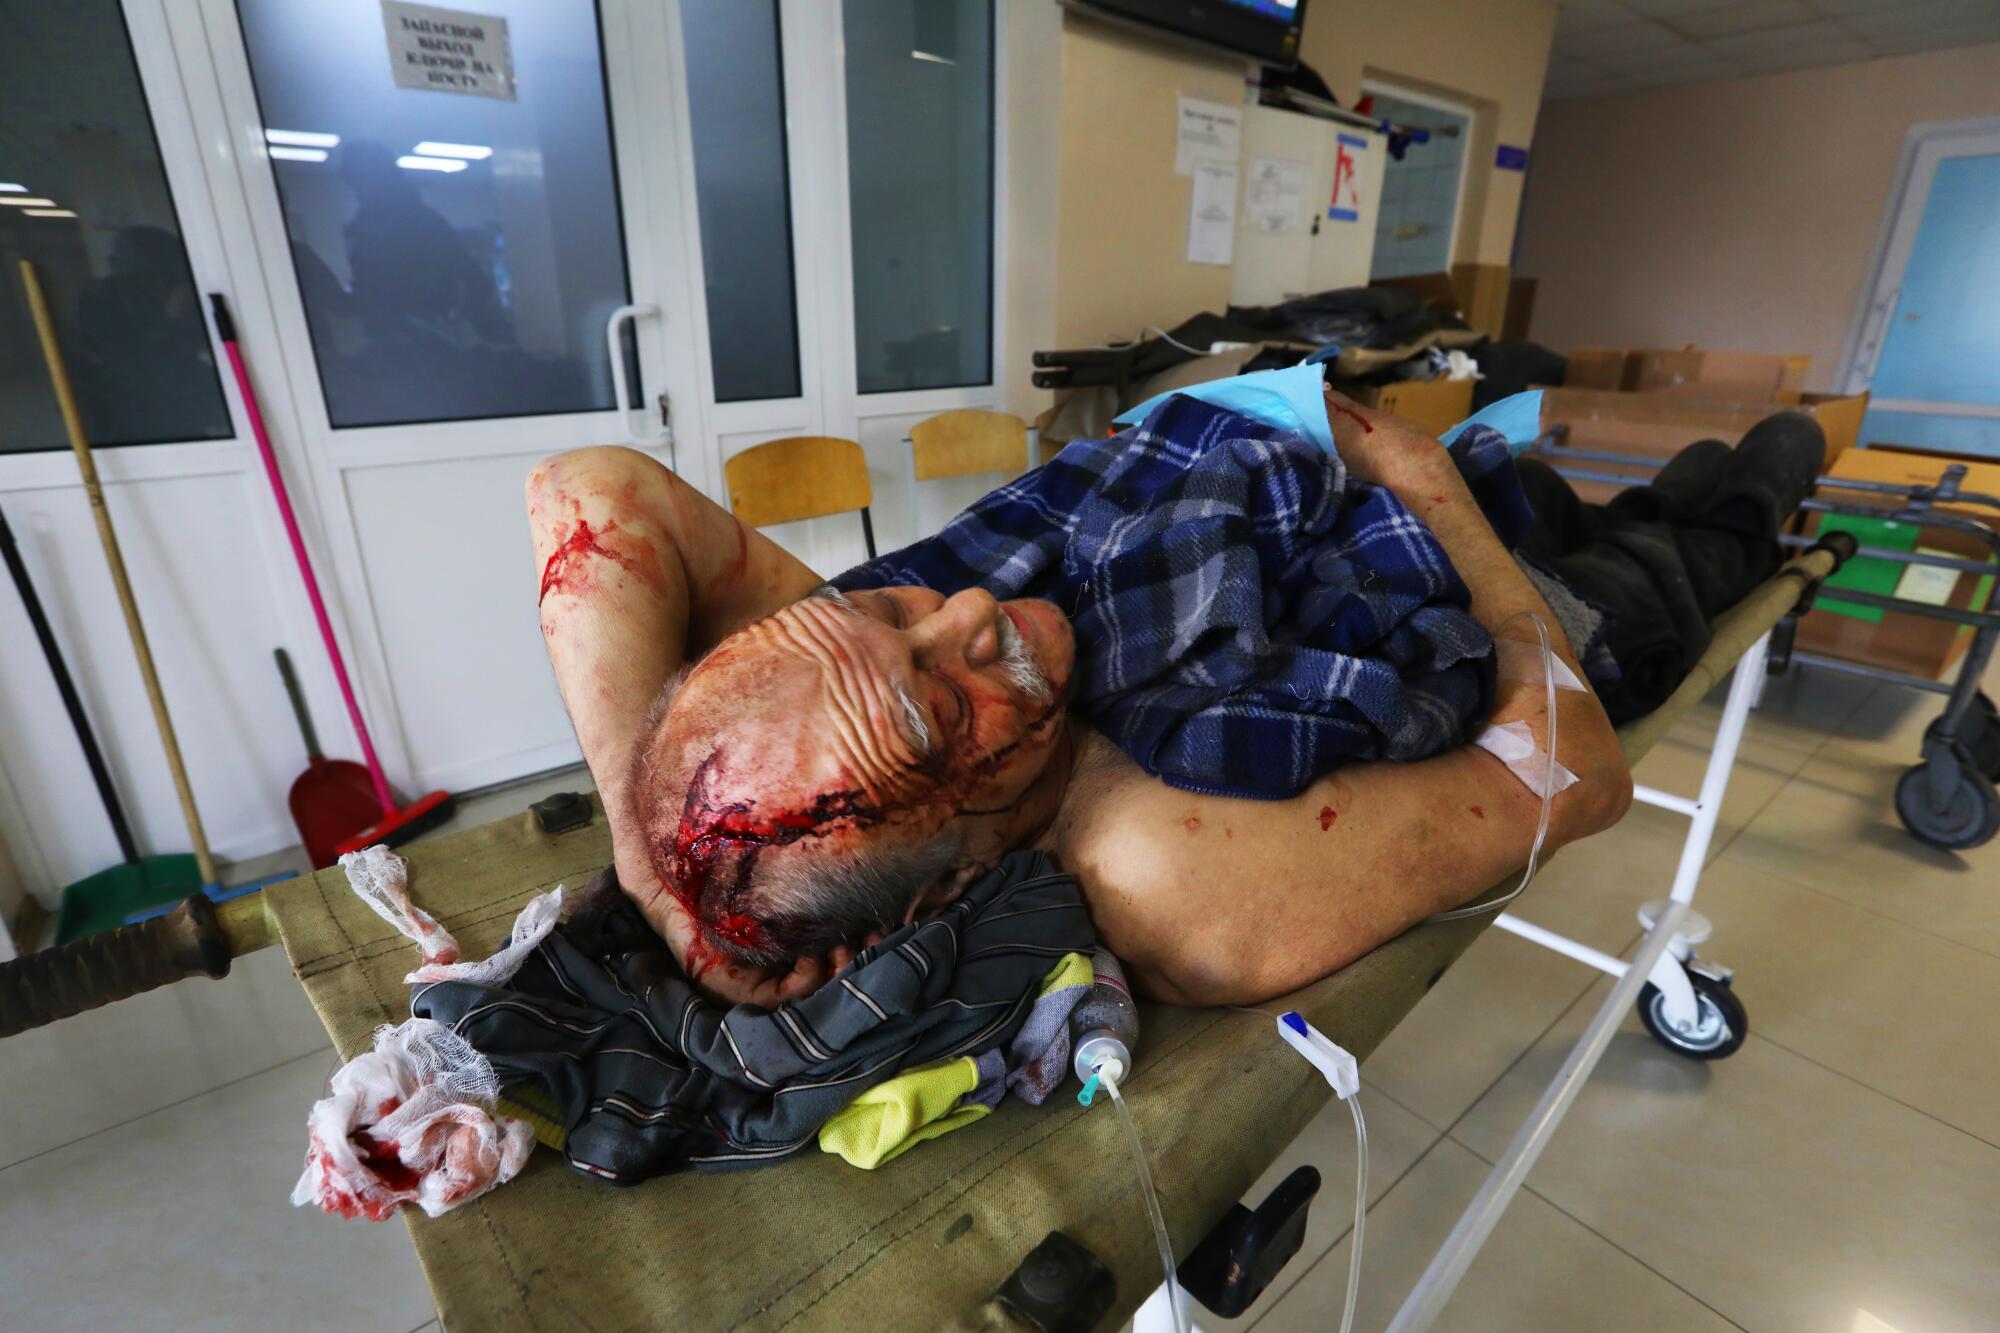 At a frontline hospital in Severndenesk, Ukraine, a patient is brought in with shrapnel wounds to the head. 